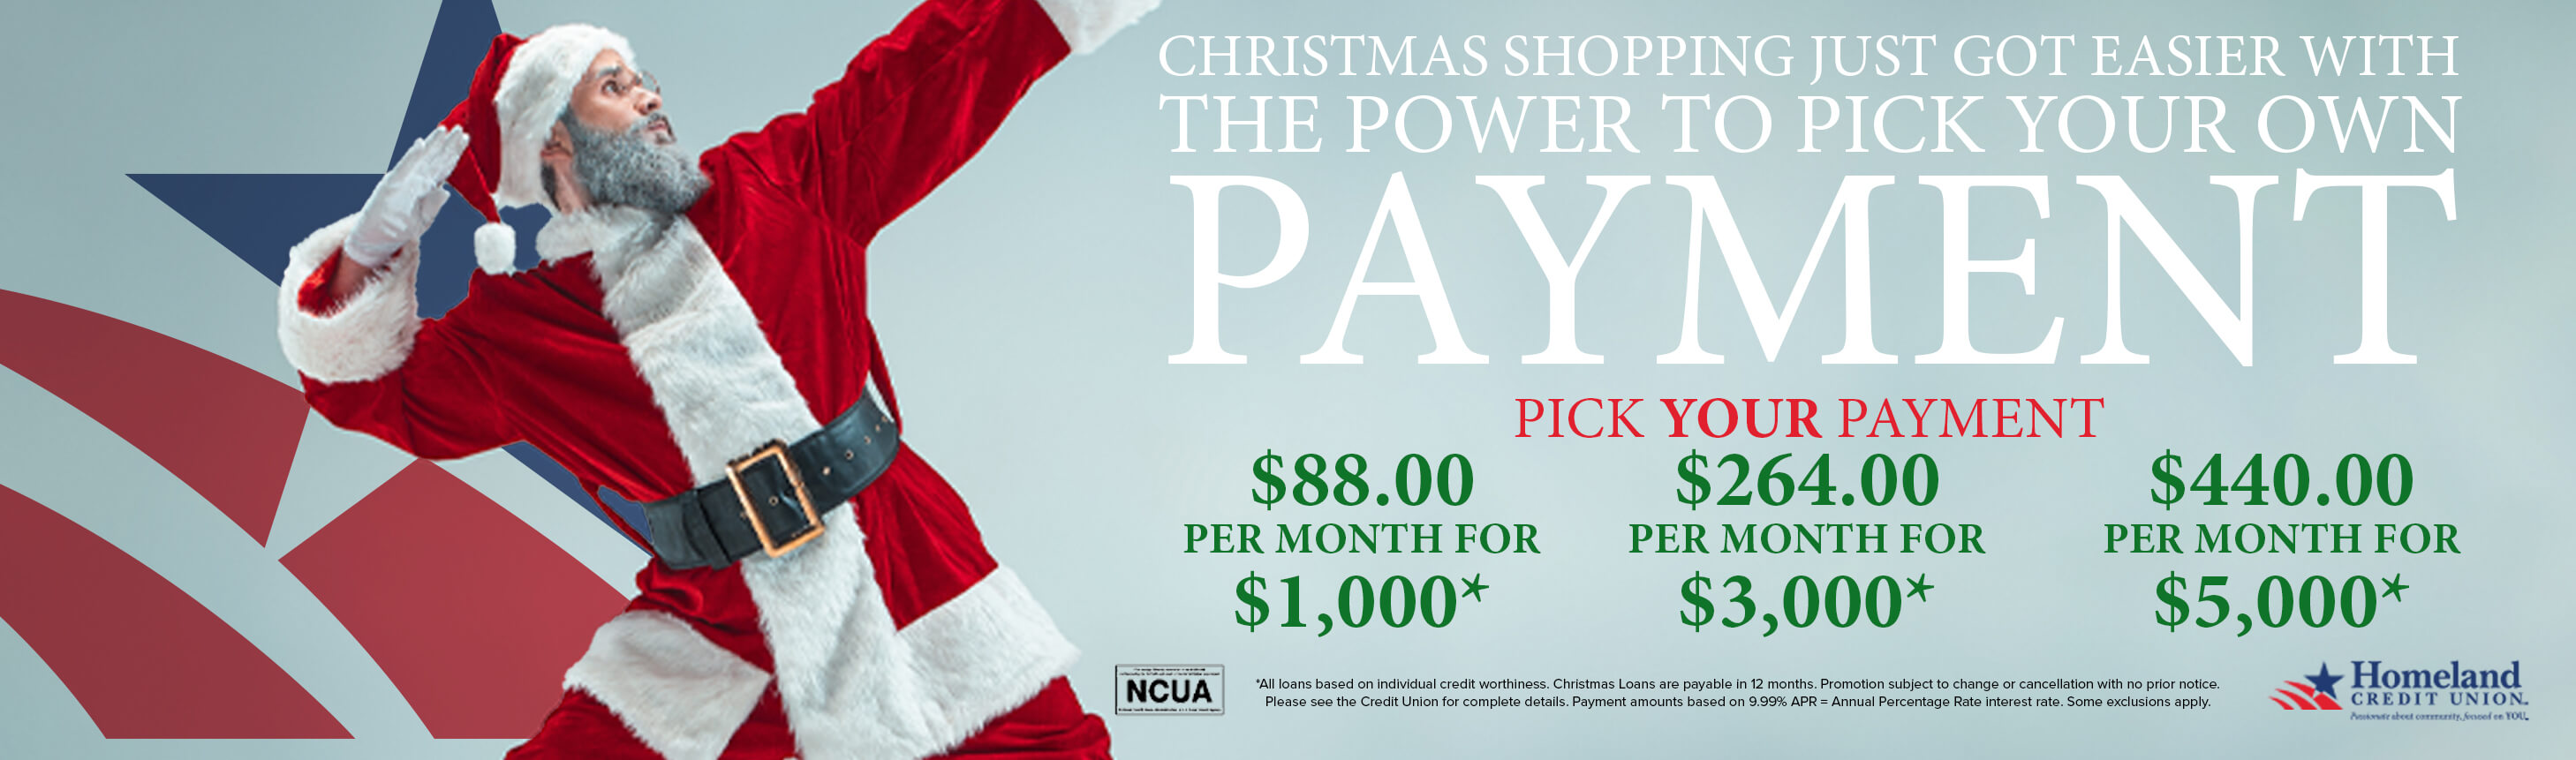 Christmas shopping just got easier with the power to pick your own payment. Pick your payment. $88 per month for $1,000*. $264 per month for $3,000*. $440 per month for $5,000*. *All loans based on individual credit worthiness. Christmas loans are payable in 12 months. Promotion subject to change or cancellation with no prior notice. Please see the Credit Union for complete details. Payment amounts based on 9.99% APR = Annual Percentage Rate interest rate. Some exclusions apply. 